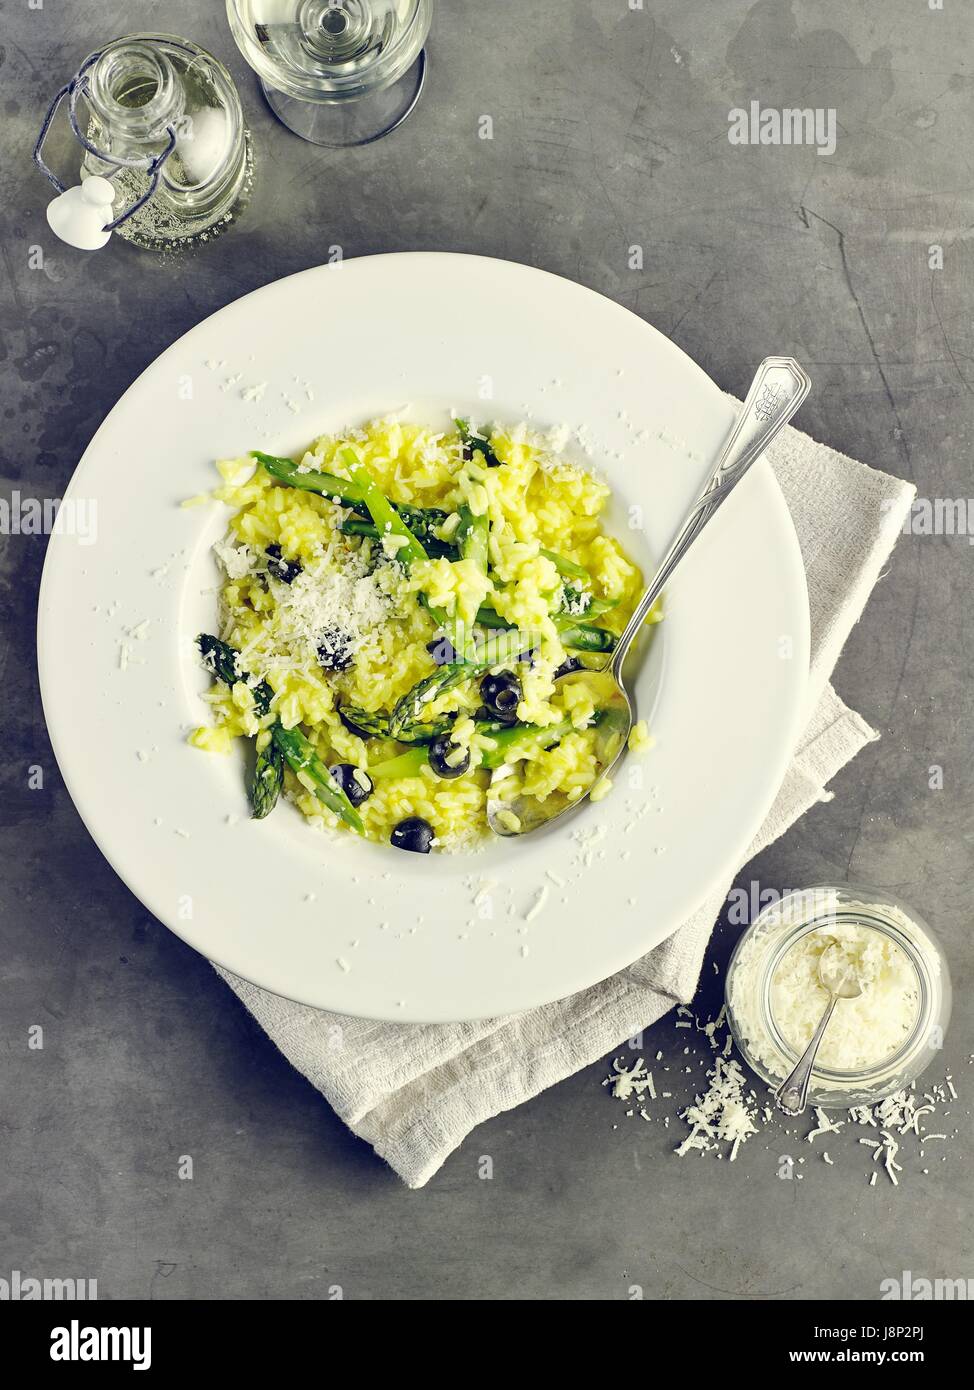 Risotto Milanese with green asparagus Stock Photo